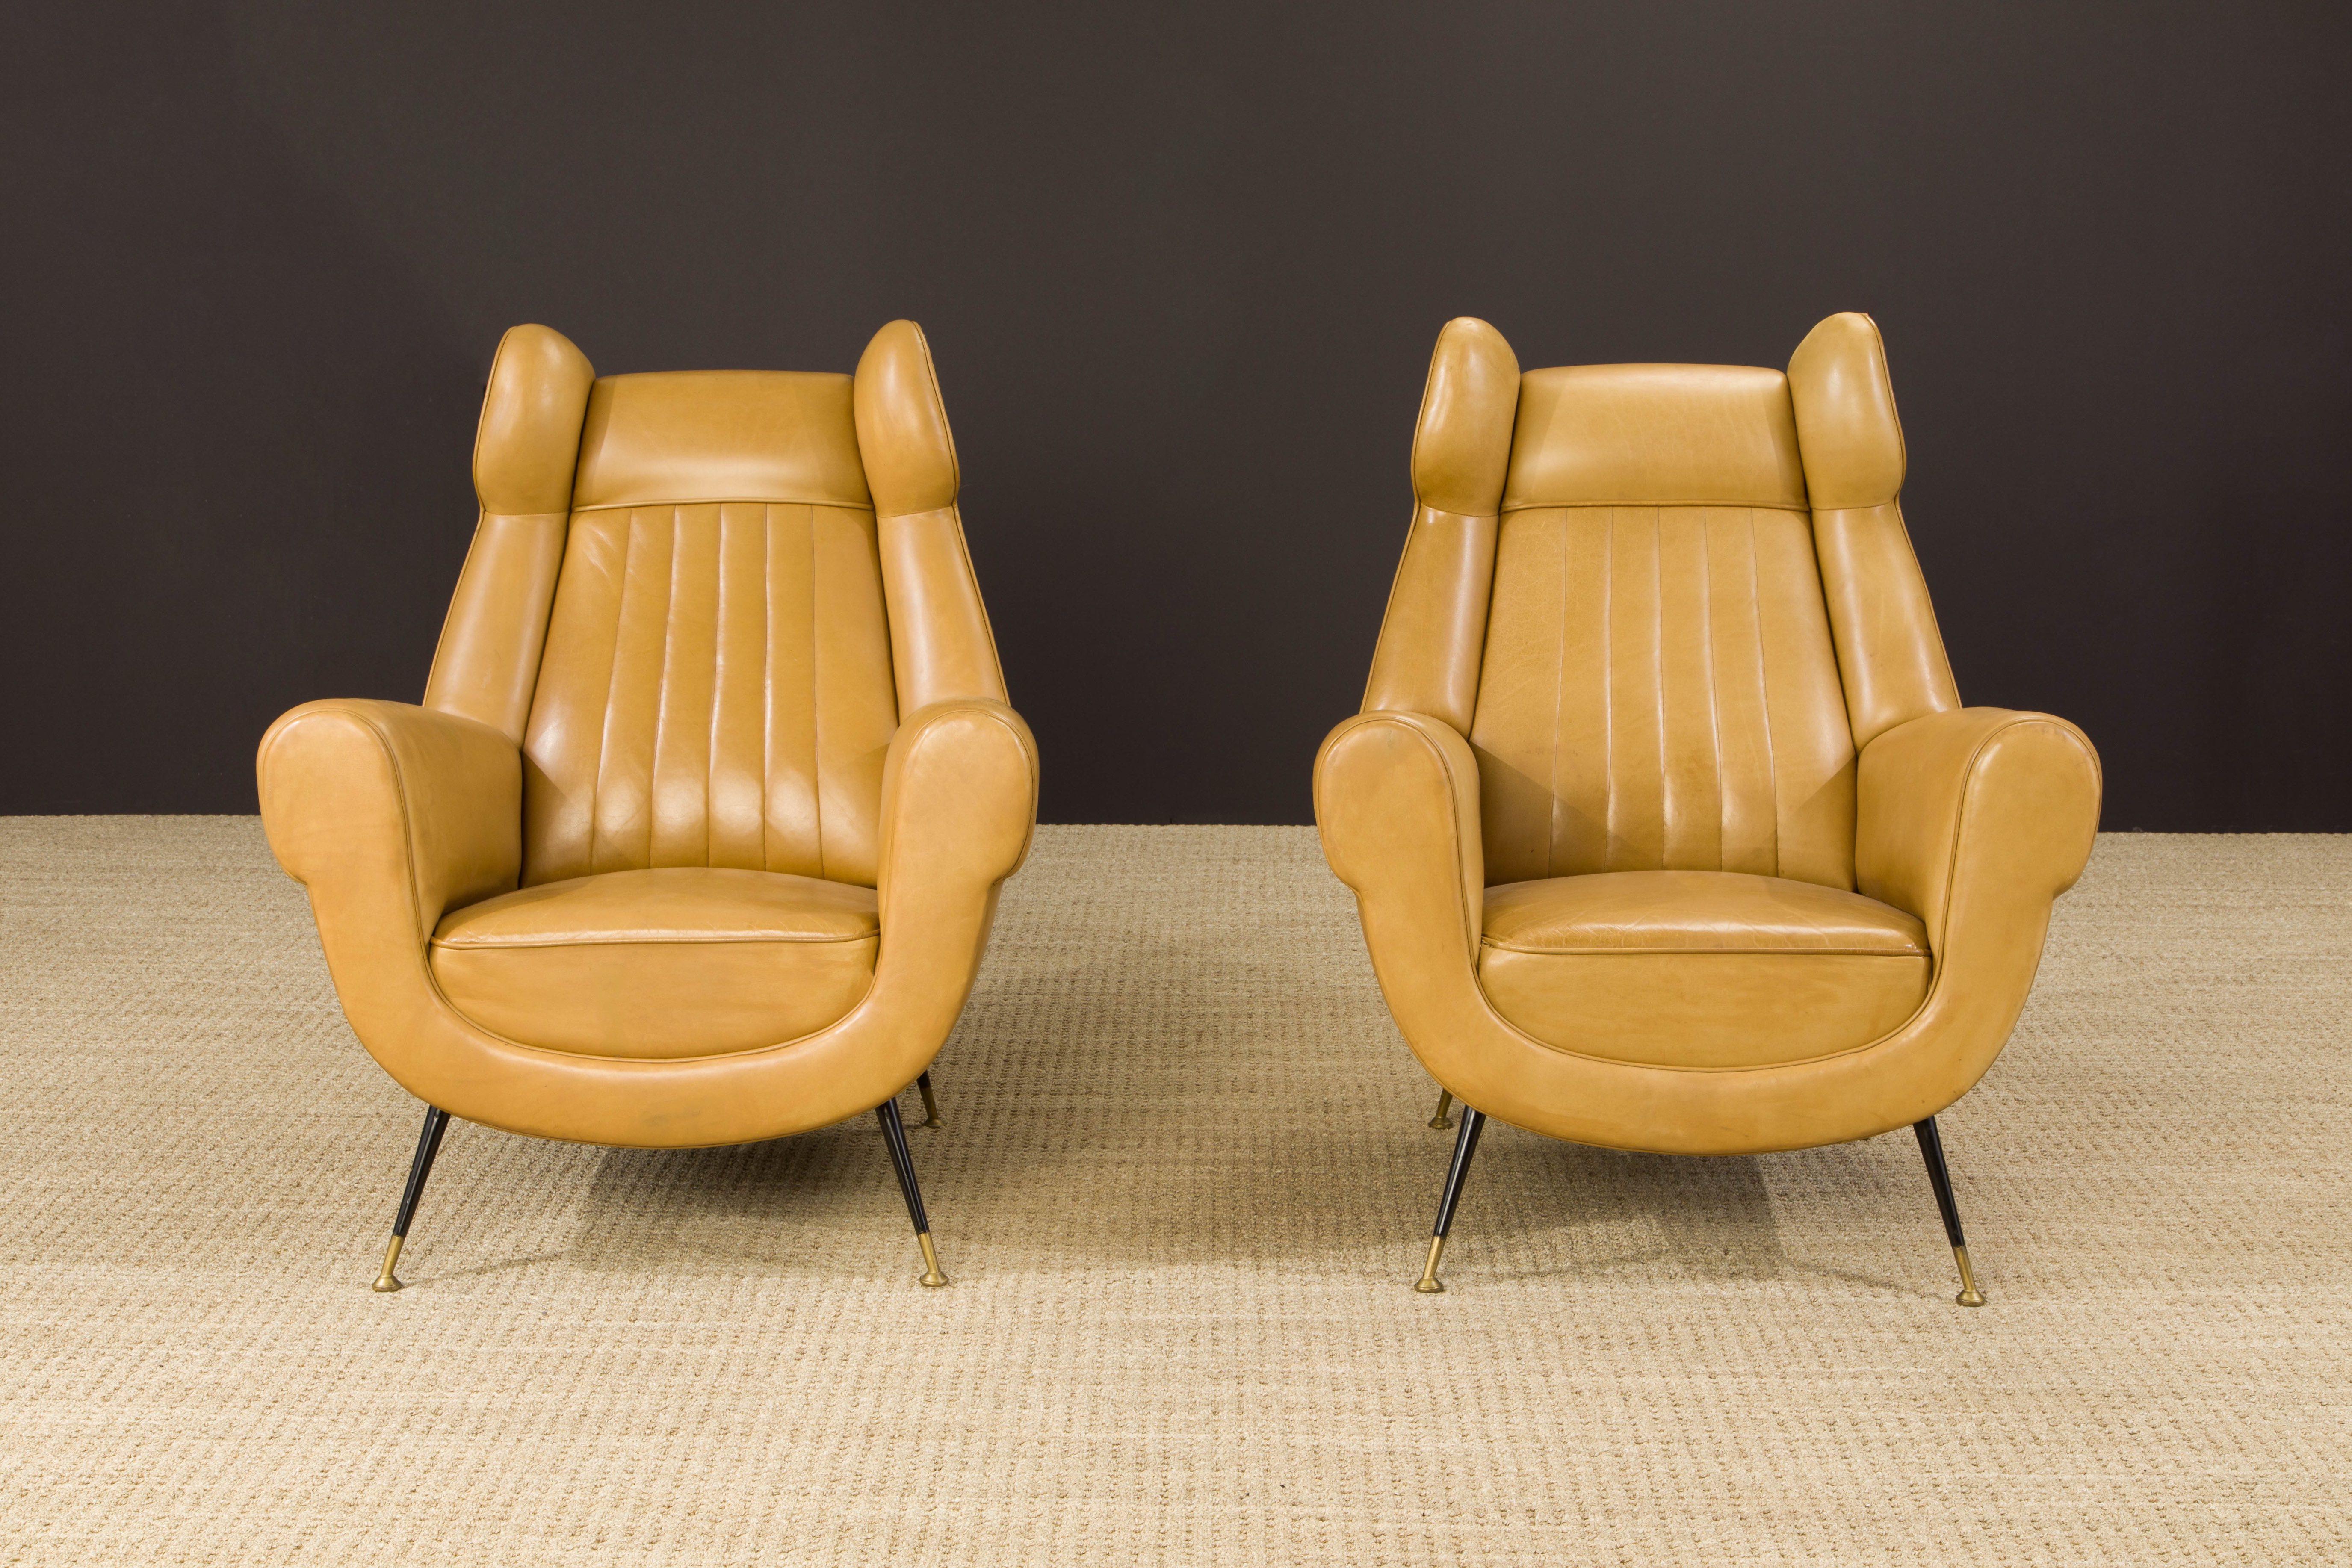 *Consolidated listing for client, pair of Gigi Radice lounge chairs and Tommi Parzinger dining table, detailed below:

This pair of 1960s Gigi Radice for Minotti leather wingback chairs are currently the gallery owner's favorite pair of armchairs in